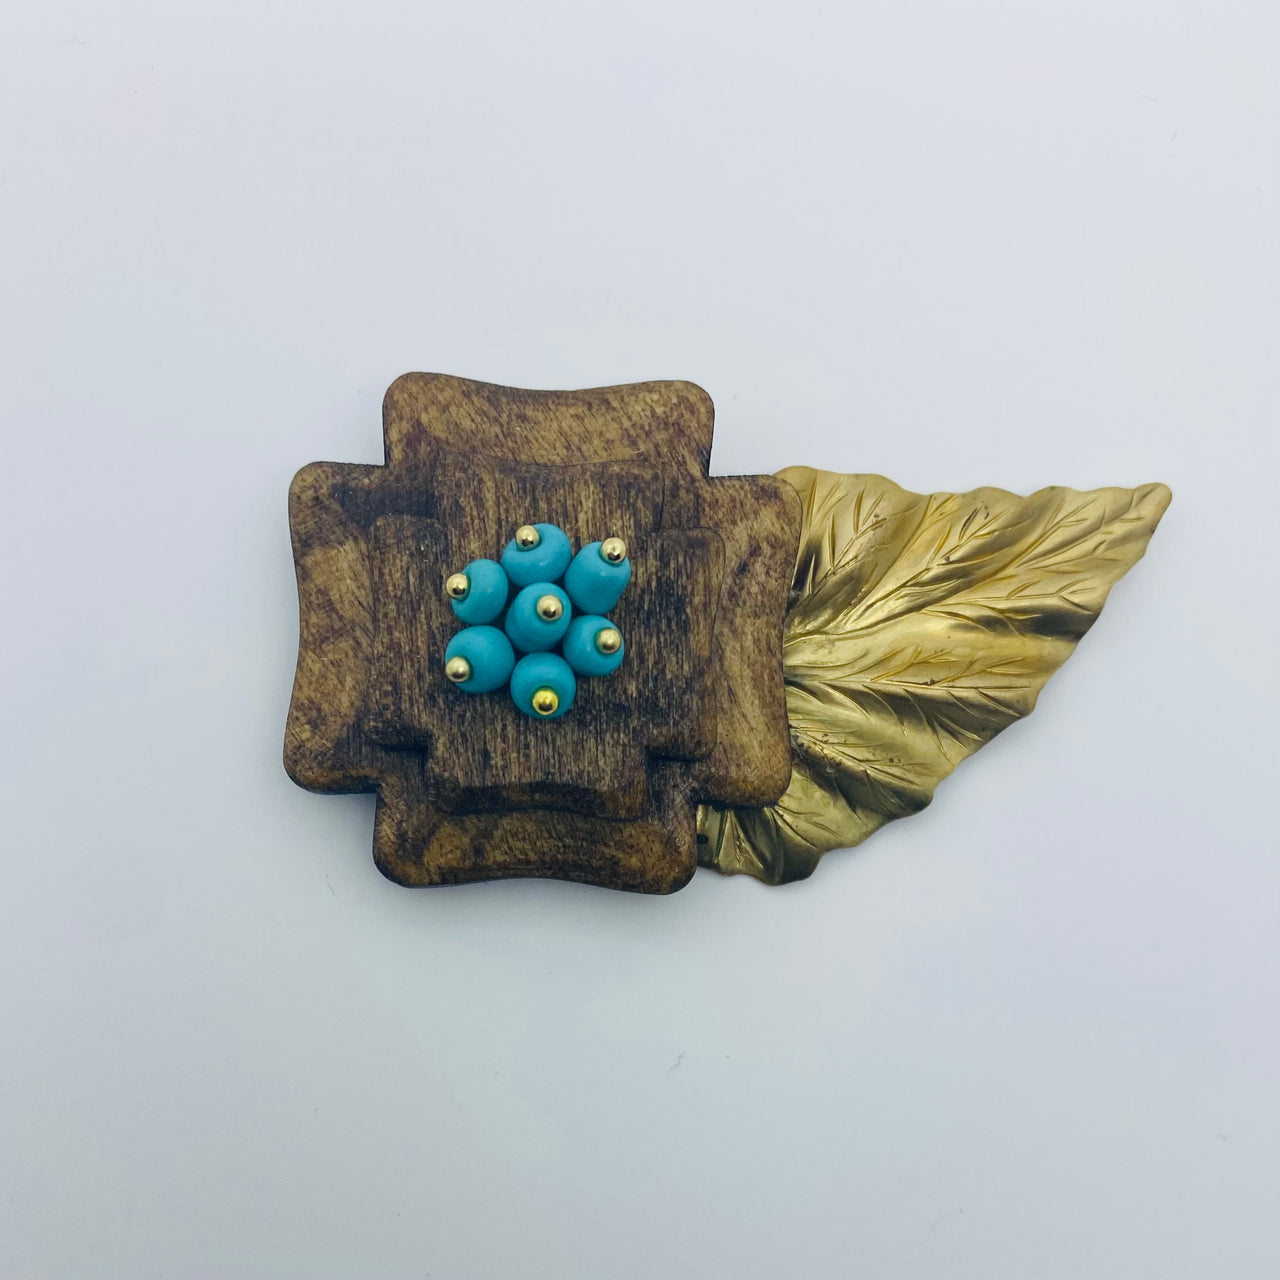 Hand Carved Wooden Haskell Blossom Litewood Brooch in Aqua